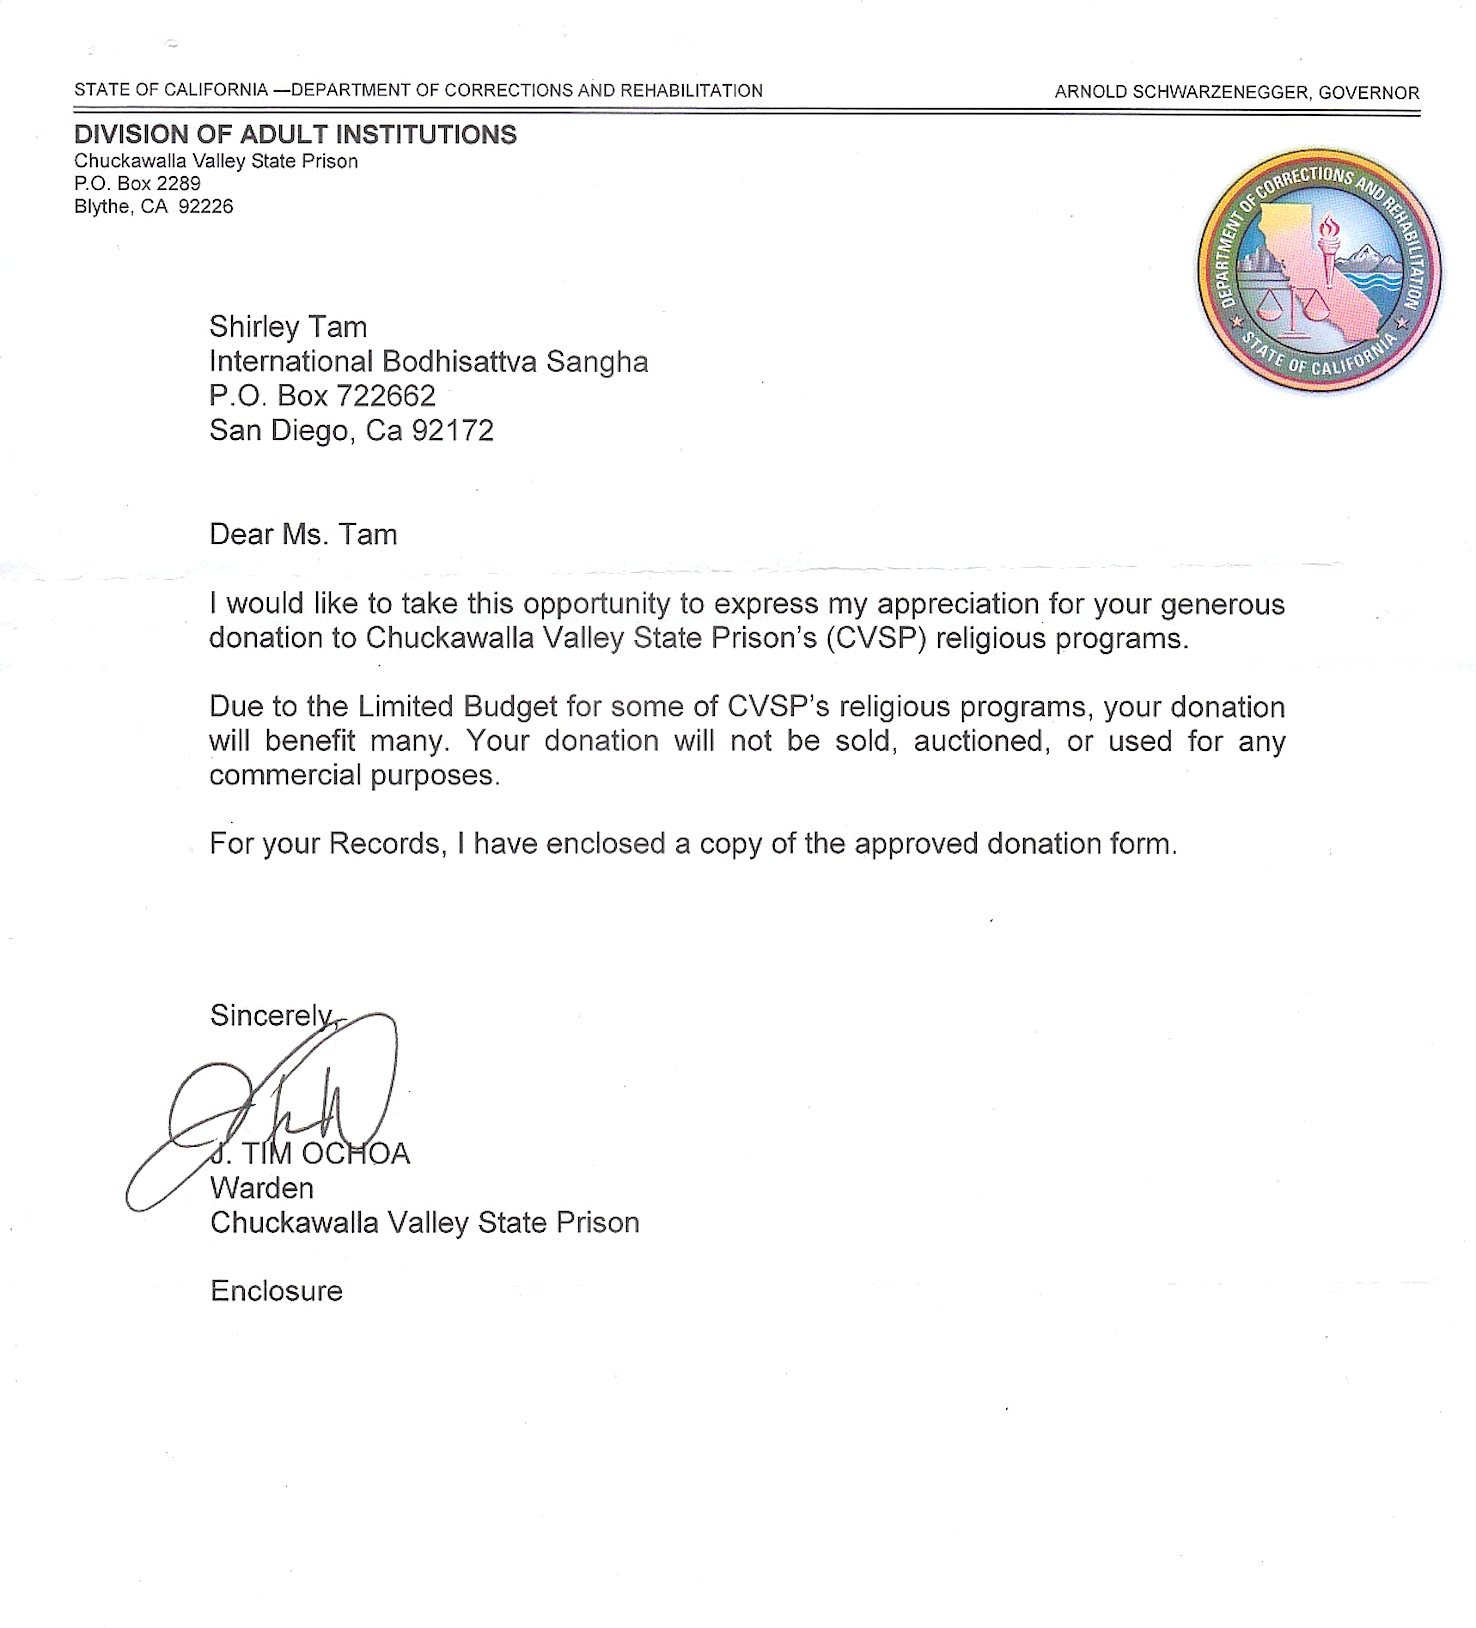 Donation Approved Letter for IBS // Update Aug.29  Buddhist Causes